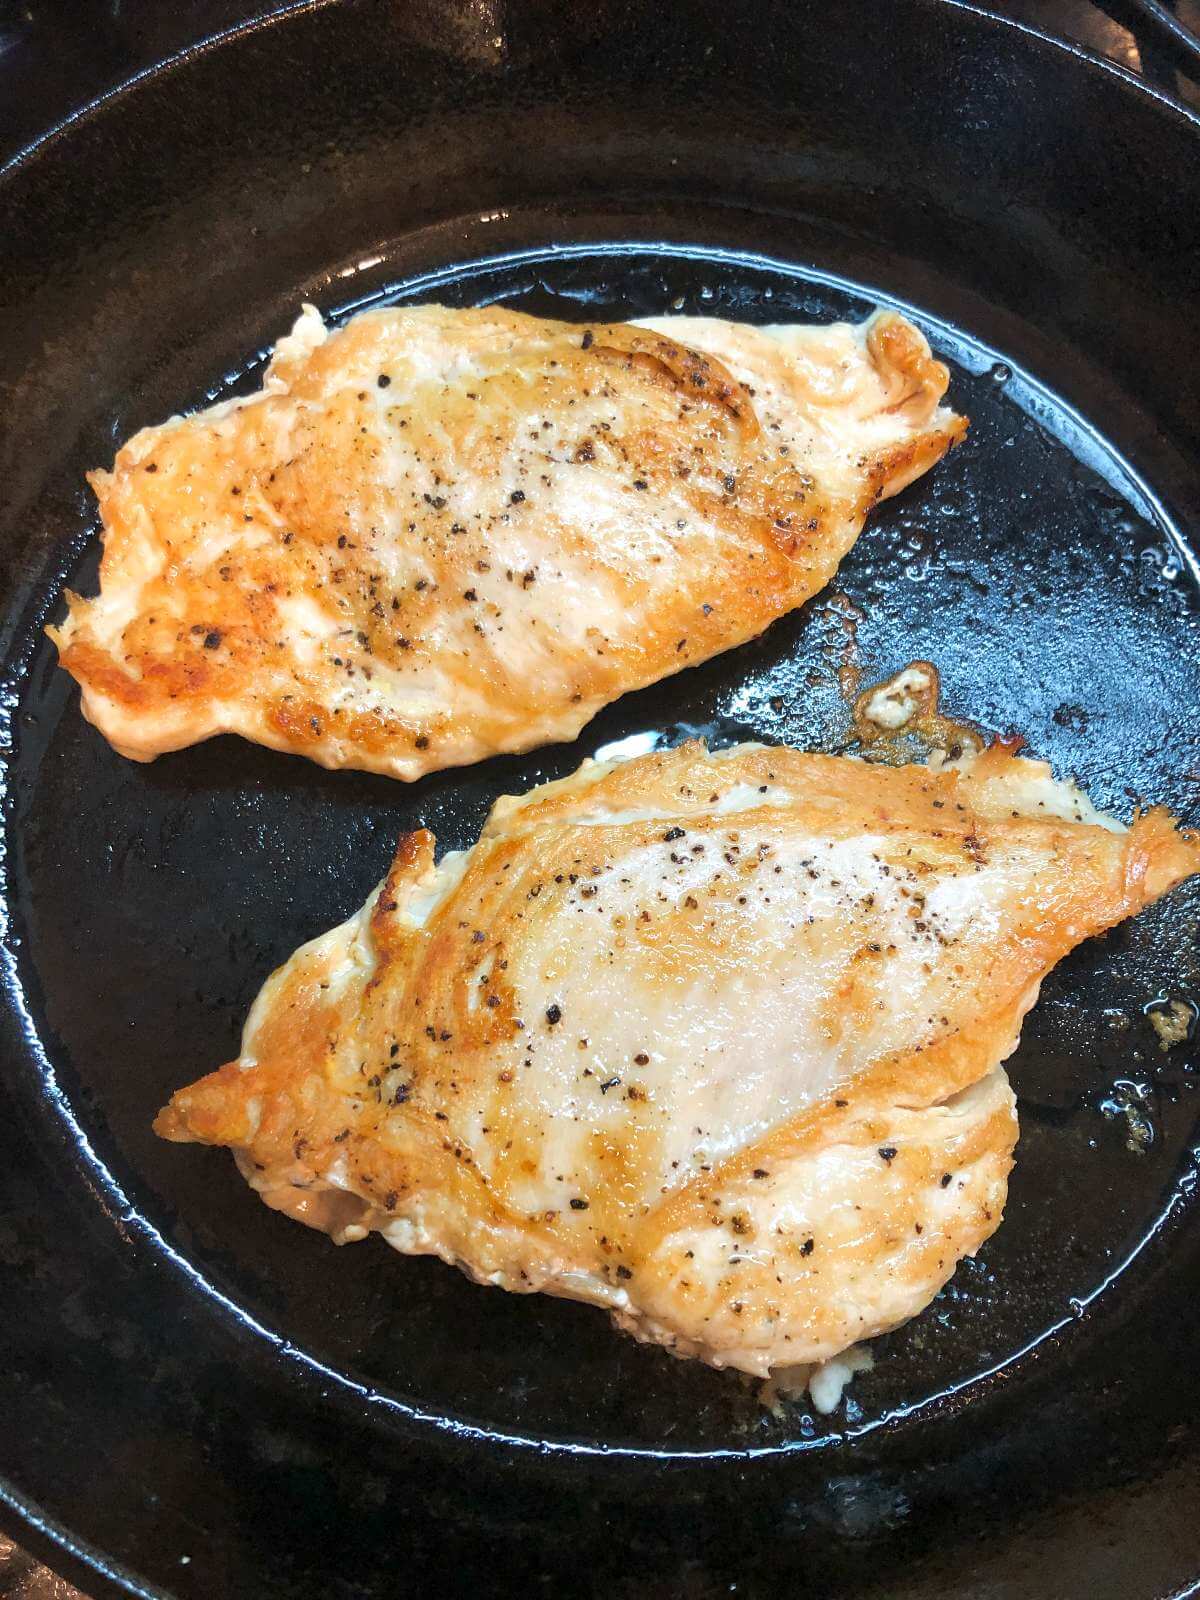 CHICKEN BREASTS COOKING IN A PAN